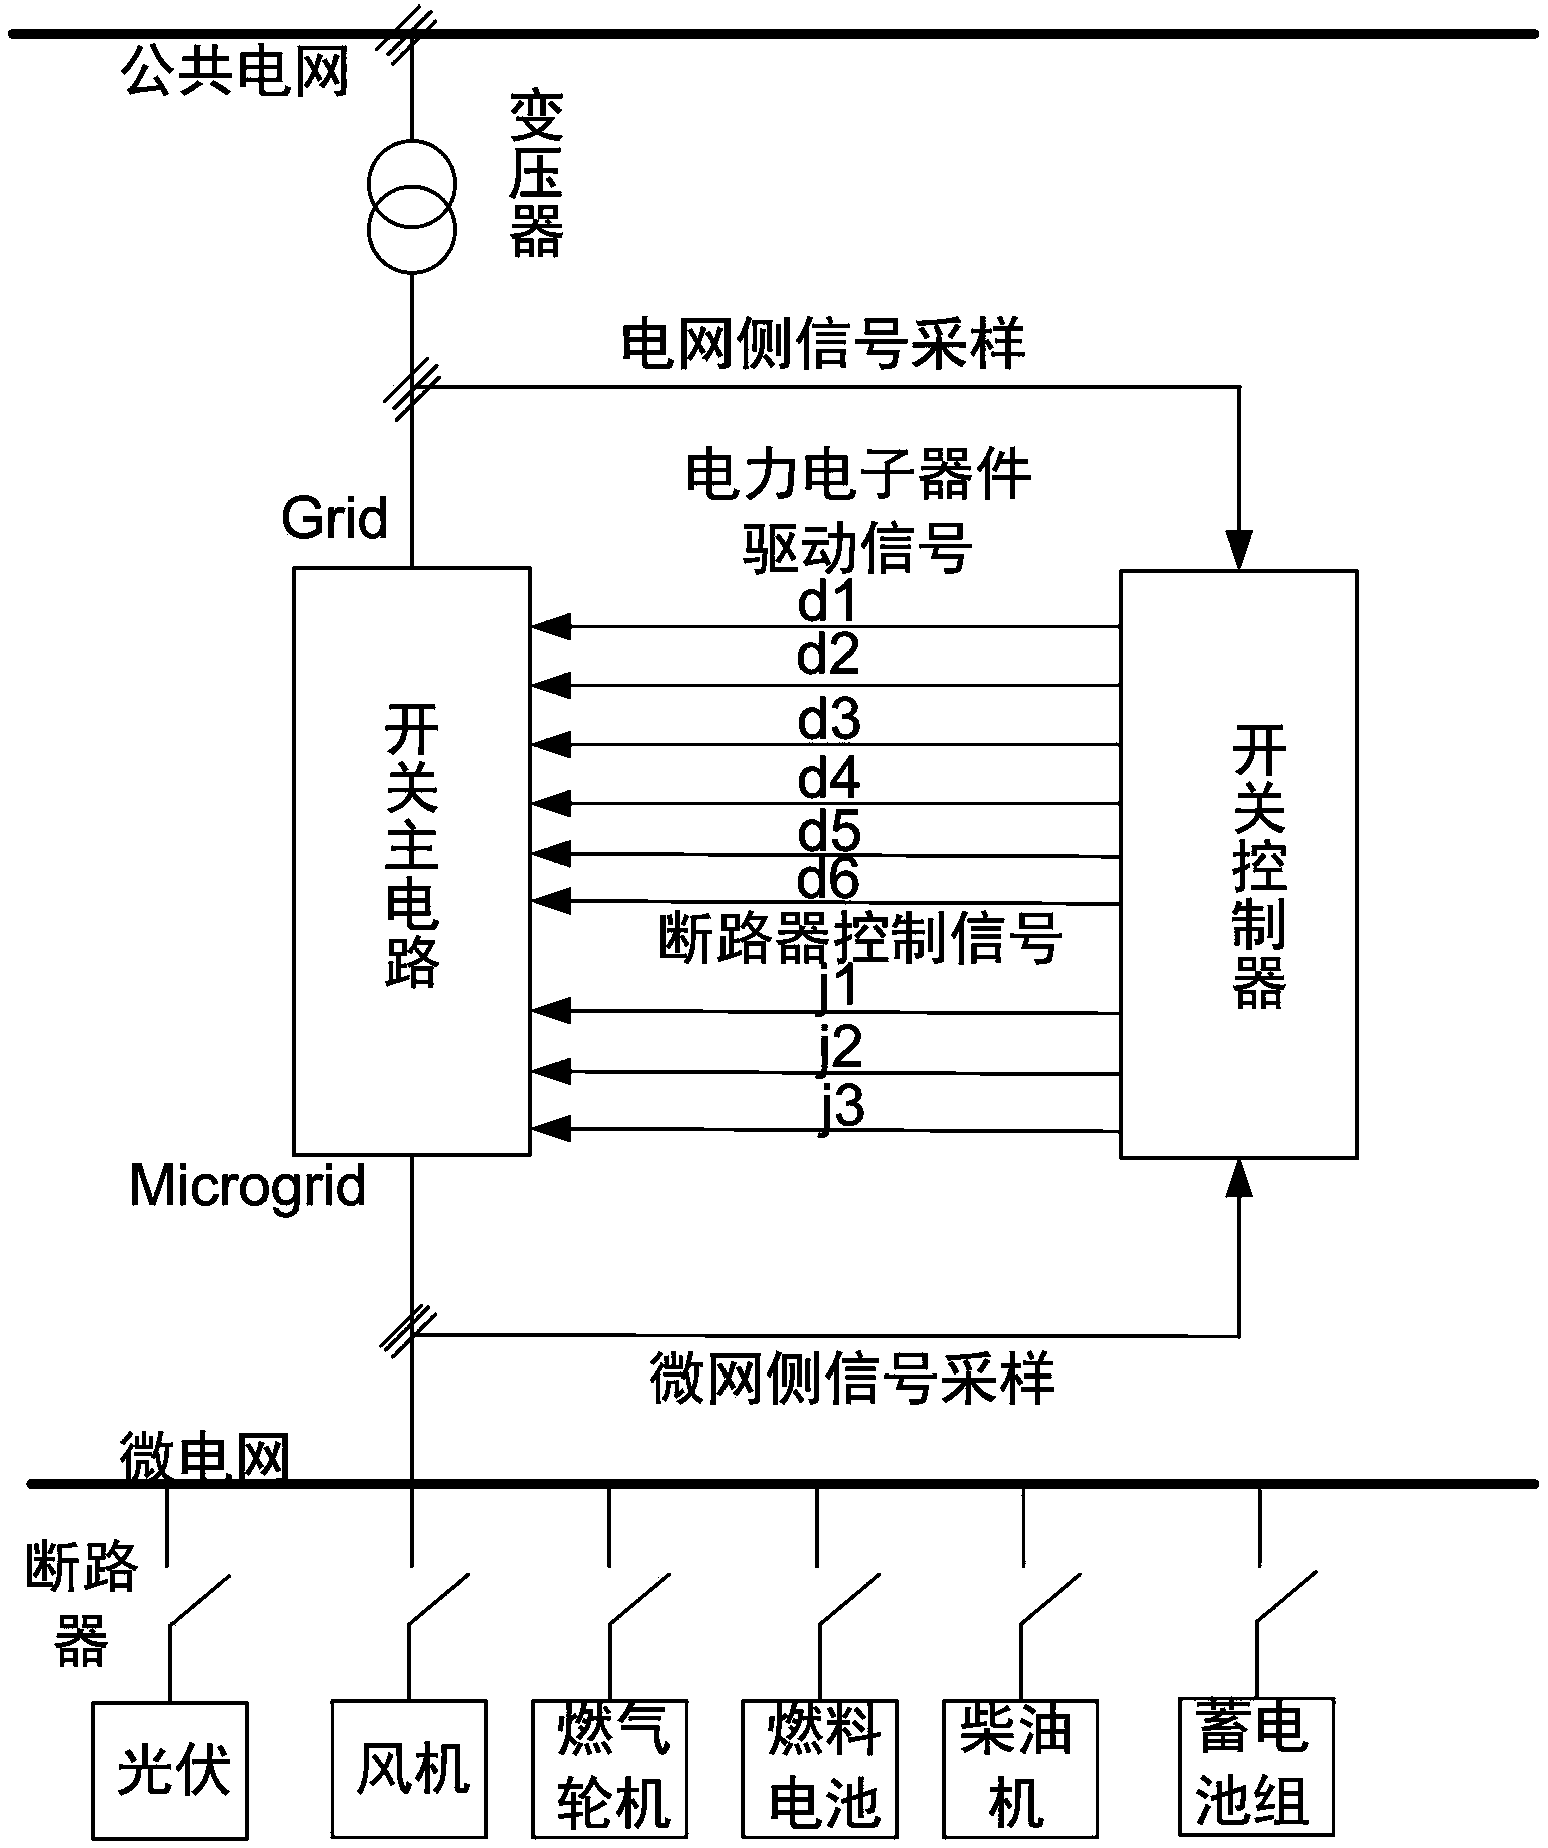 A static switch and control method applied to the connection between microgrid and public grid